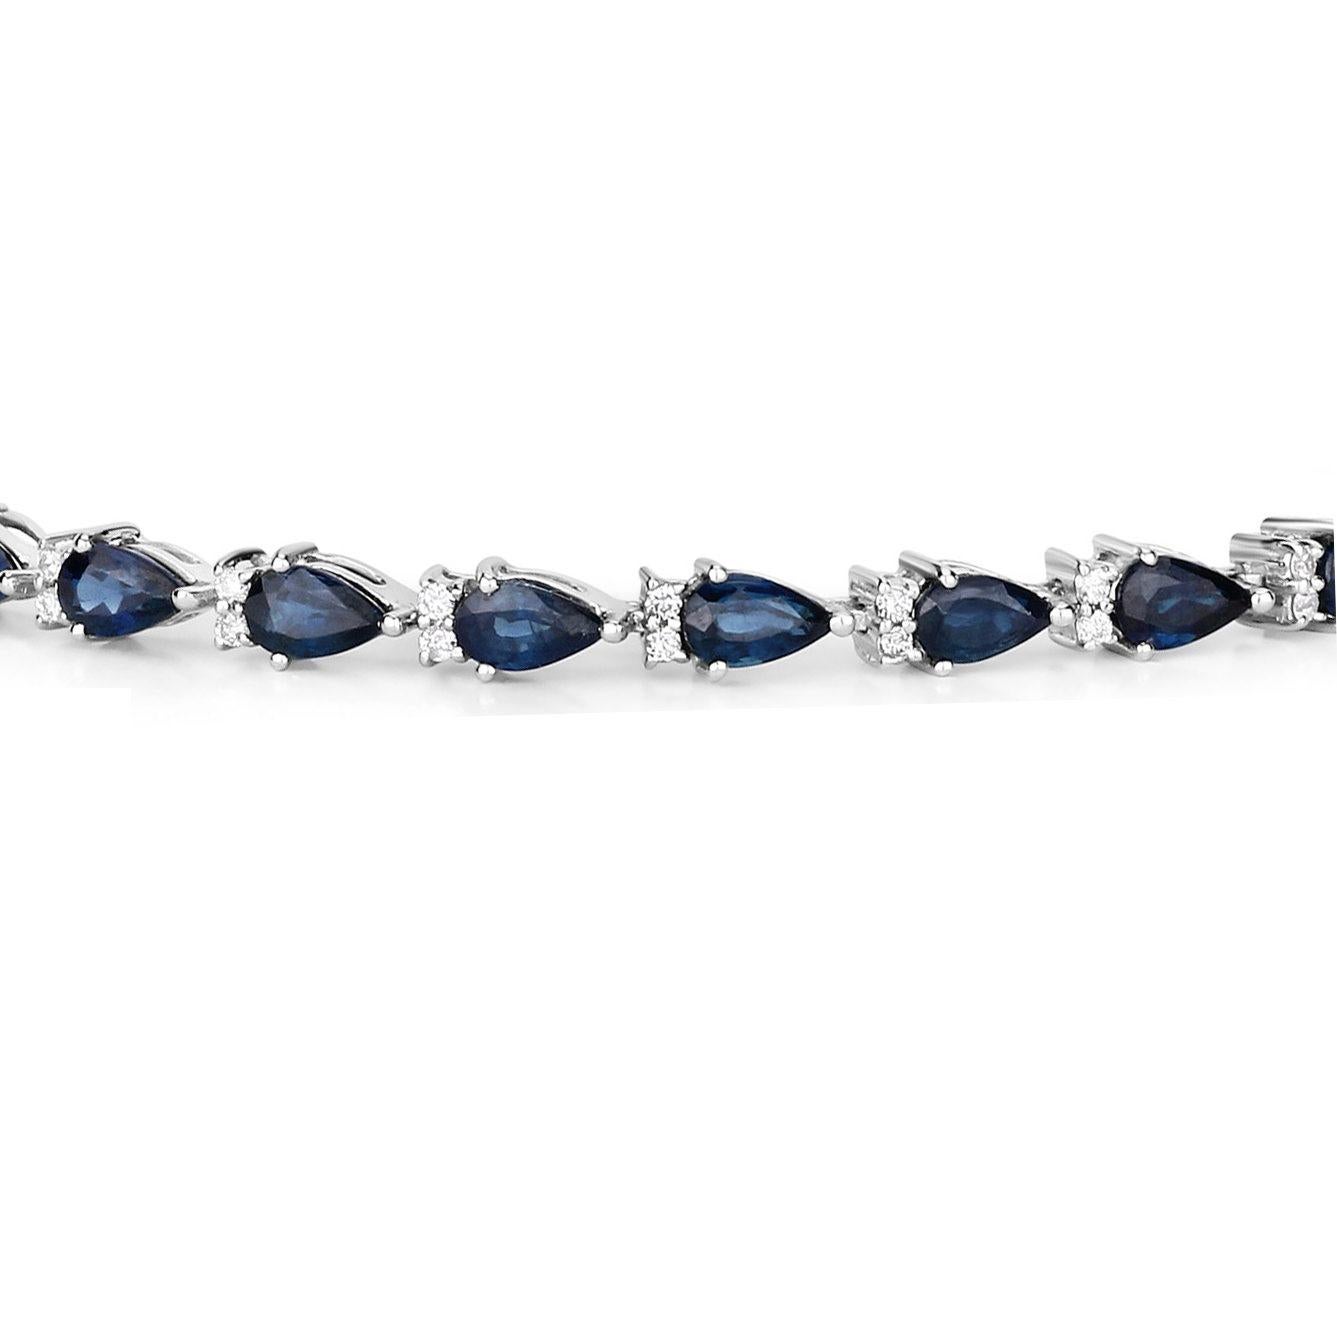 Blue Pear Cut Sapphire Tennis Bracelet Diamond Links 5.40 Carats 14K White Gold In Excellent Condition For Sale In Laguna Niguel, CA